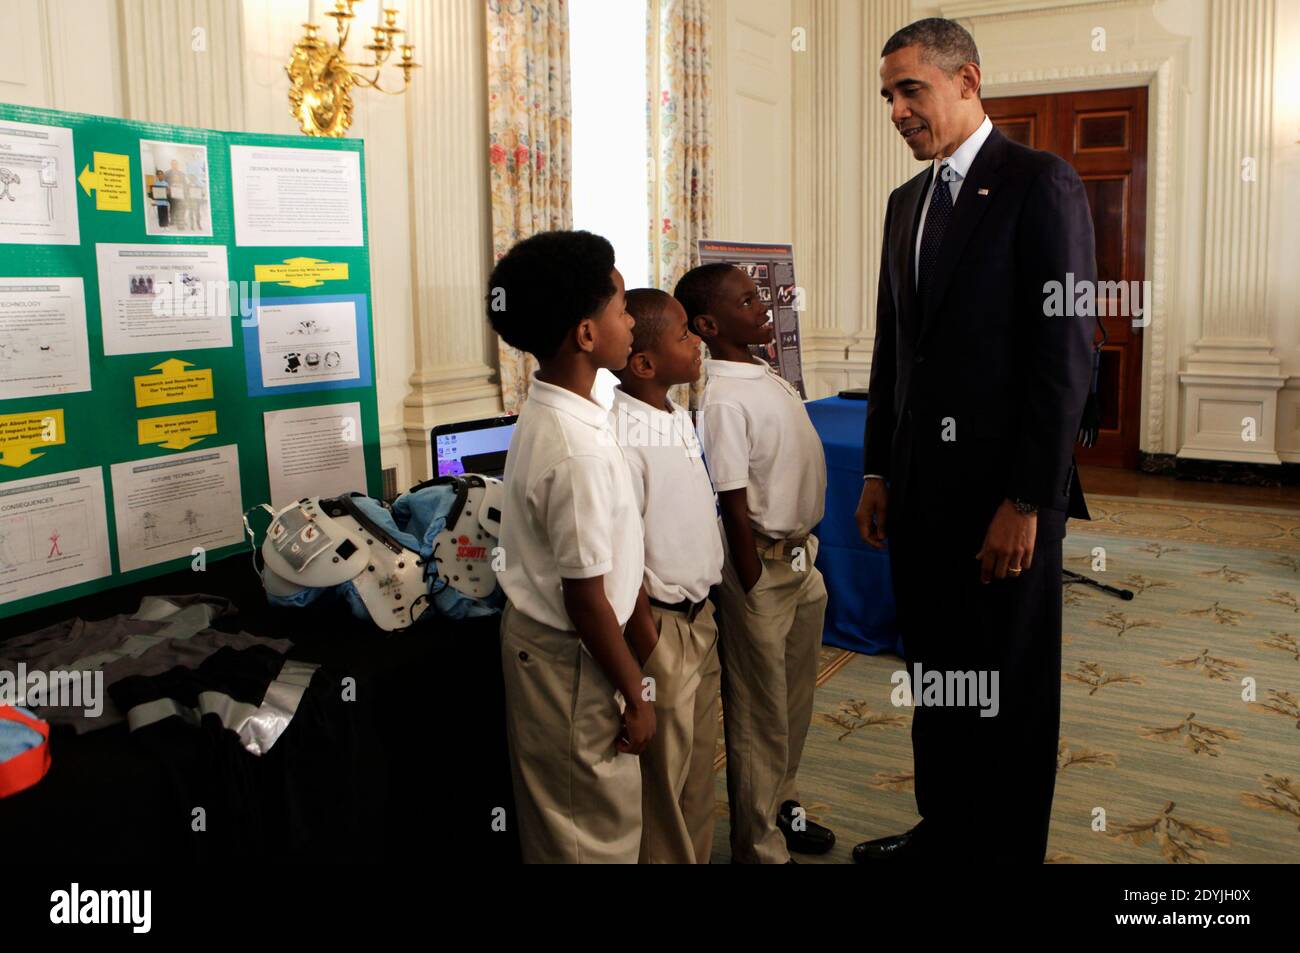 President Barack Obama looks at the COOL PADS for shoulders, helmet, armpits and groin created by Evan Jackson, Alec Jackson and Caleb Robinson, from Flippen Elementary School students from McDonough, Georgia, in the State Dining Room of the WHite House during the White House Science Fair in Washington, DC, USA, on April 22, 2013. The White House Science Fair celebrates the student winners of a broad range of science, technology, engineering and math (STEM) competitions from across the country. The first White House Science Fair was held in late 2010. Photo by Aude Guerrucci/Pool/ABACAPRESS.CO Stock Photo